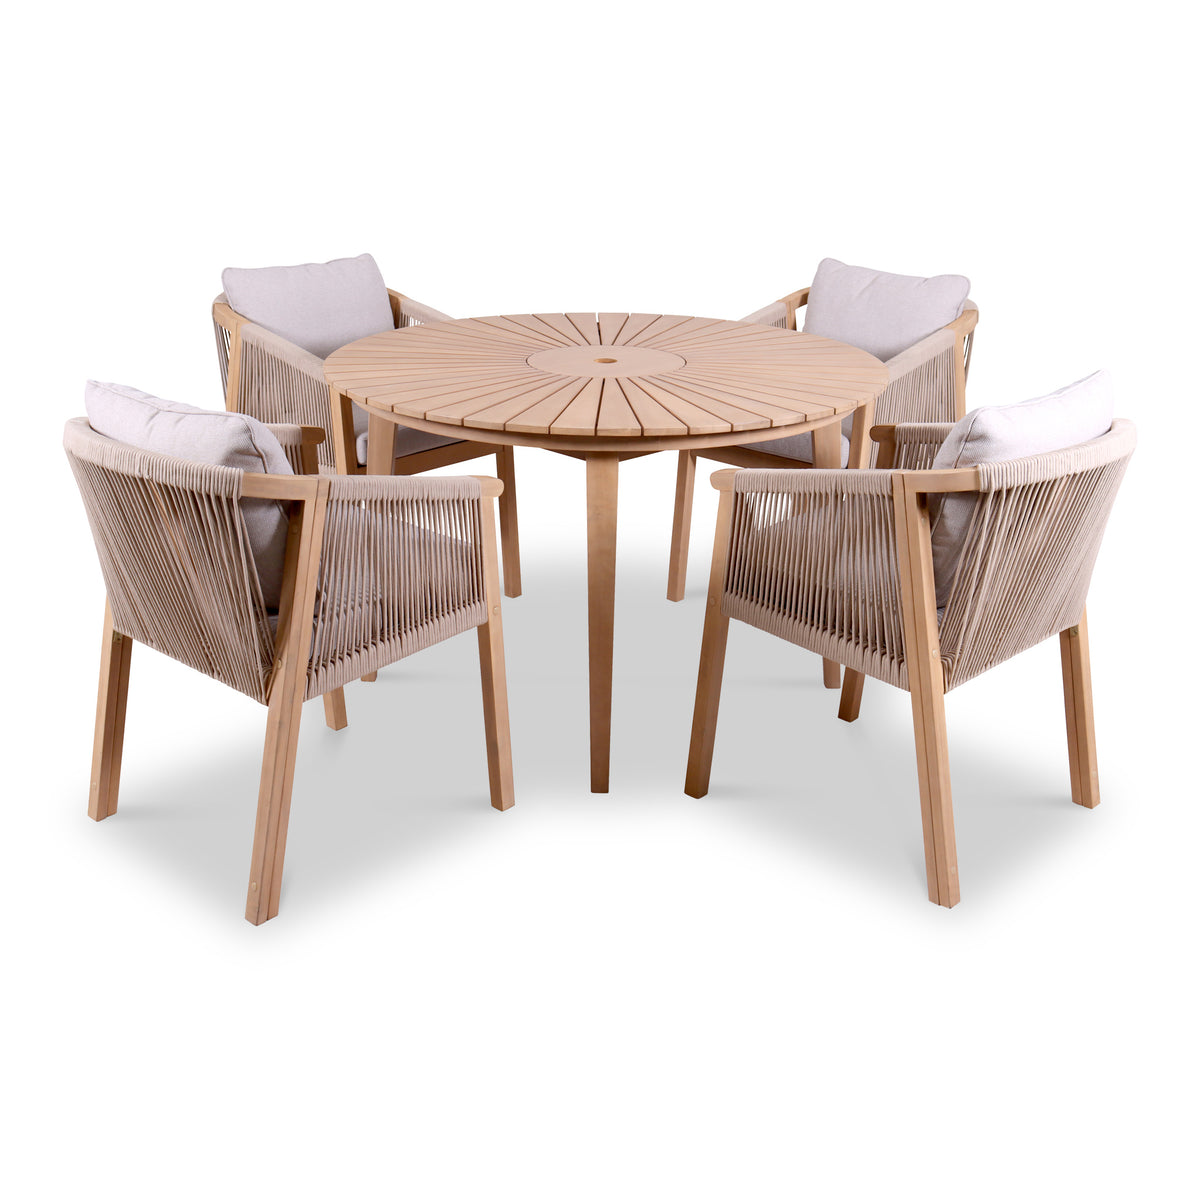 Roma FSC 120cm Table Set with 4 Roma Deluxe Chairs from Roseland Furniture